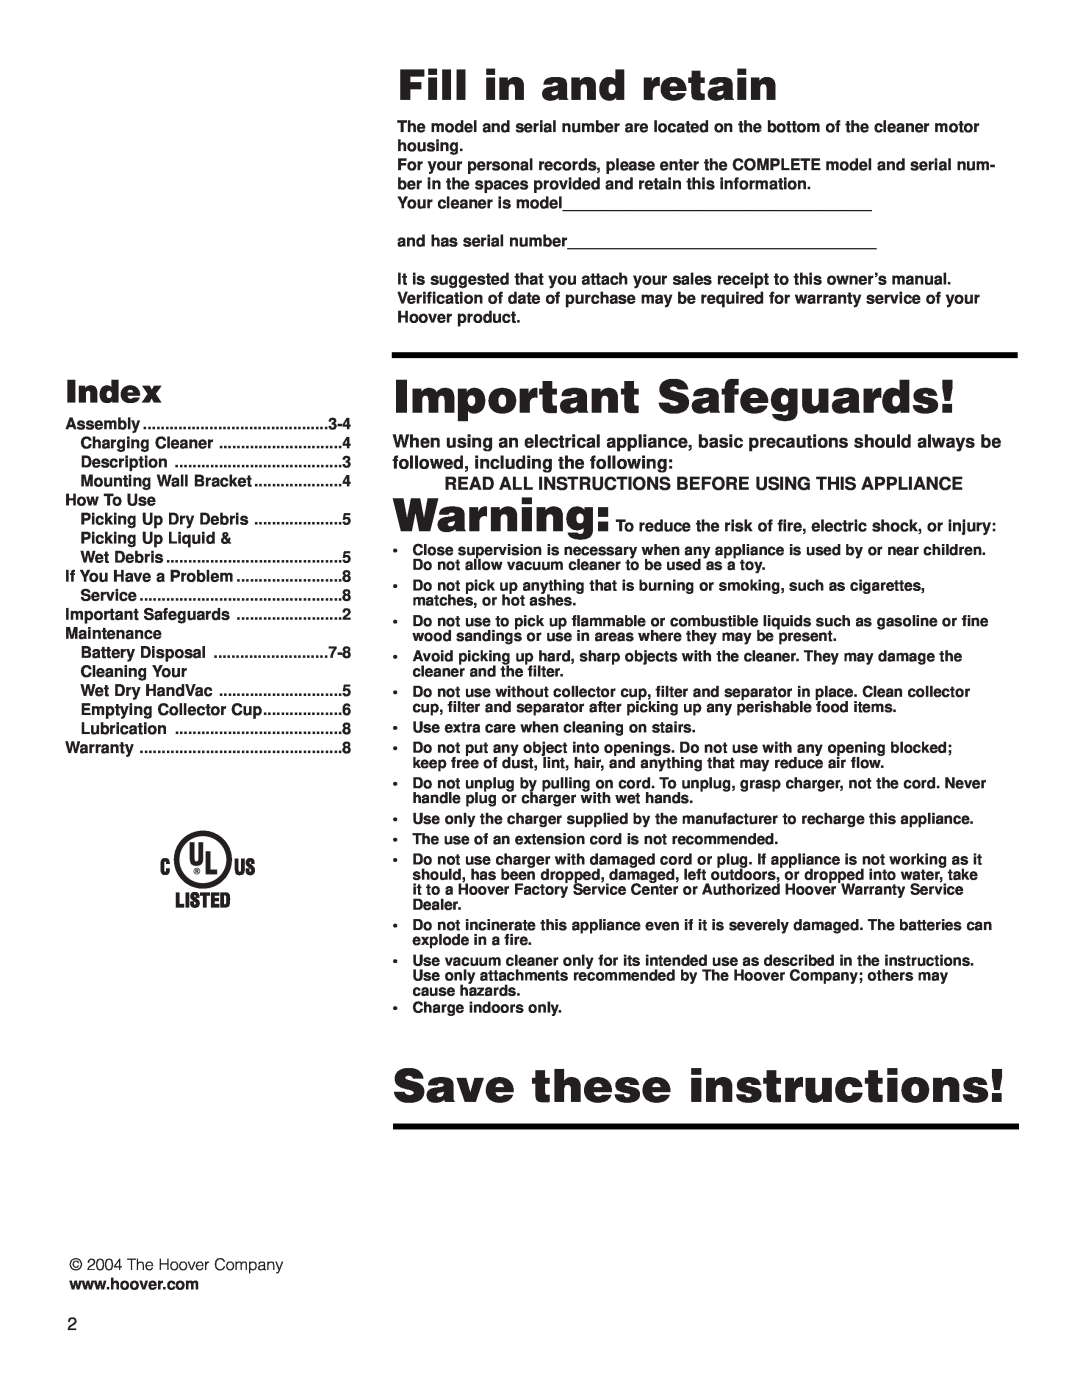 Hoover HandVac owner manual Index, Important Safeguards, Save these instructions, Fill in and retain 